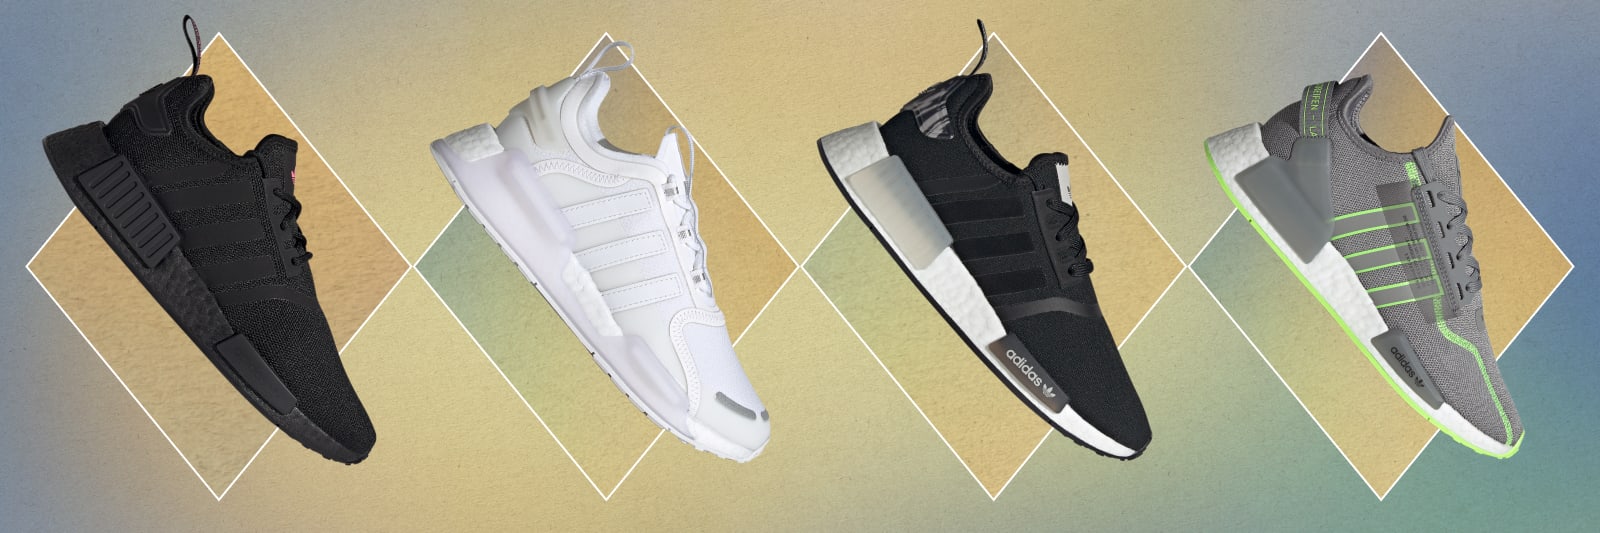 NMD Sizing: A Guide to Finding the Right Fit